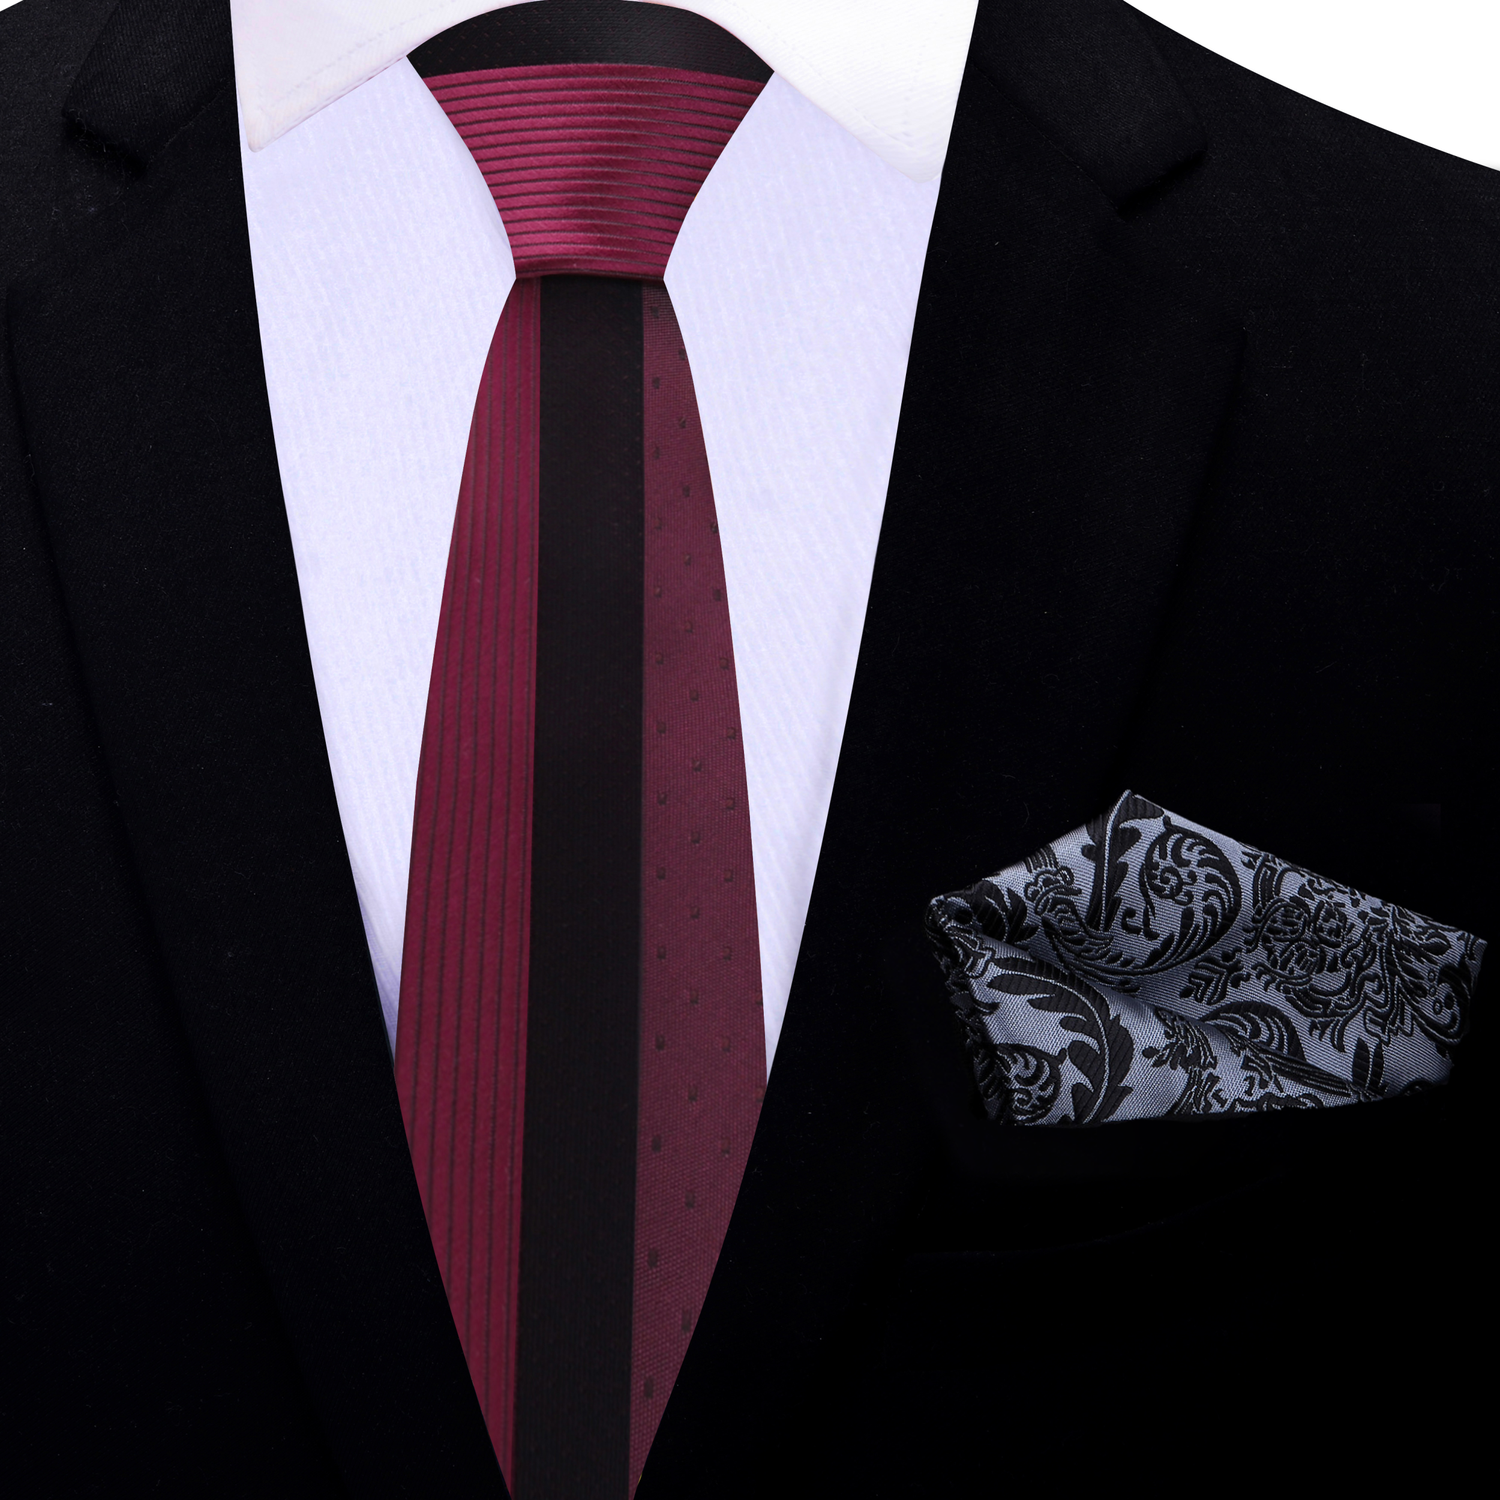 Thin Tie: Burgundy and Black Lined Necktie and Grey, Black Floral Square